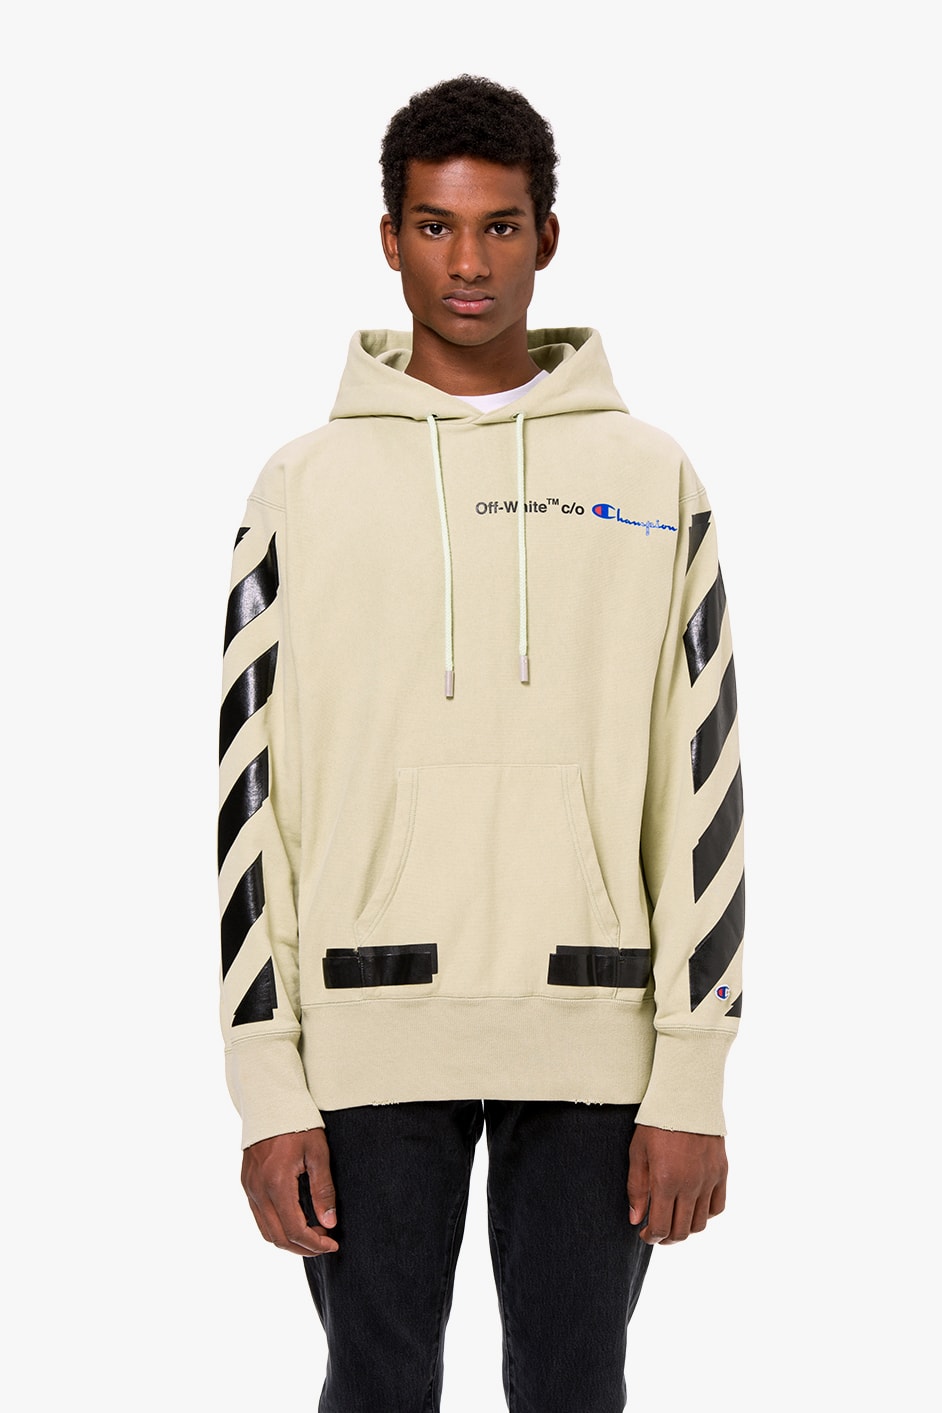 Off-White™ x Champion is Available Now